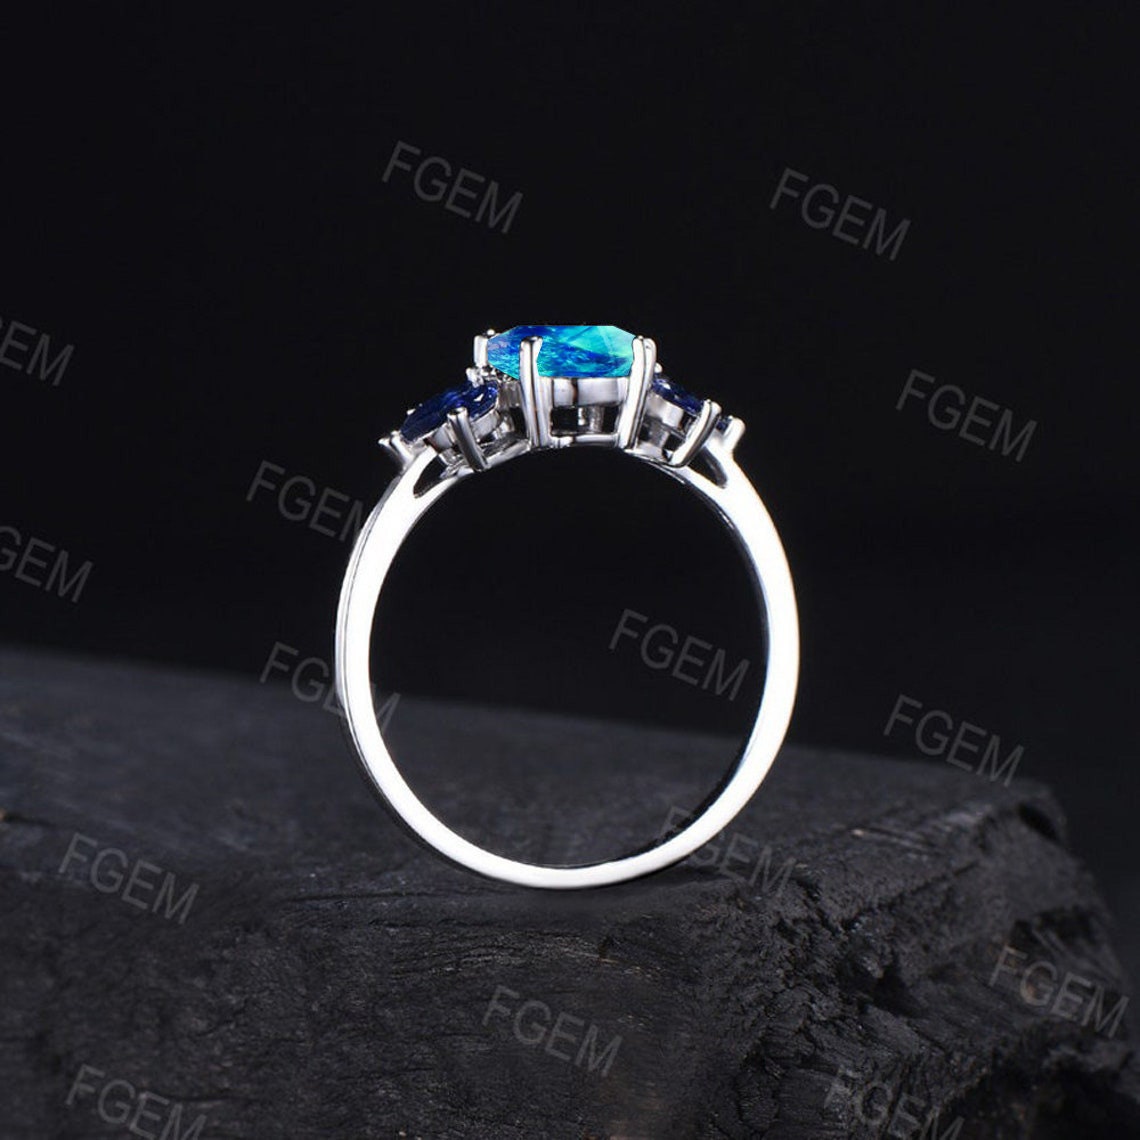 1.5ct Oval Galaxy Blue Opal Engagement Ring Sterling Silver Blue Sapphire Cluster Wedding Ring Unique Handmade Proposal Gifts Platinum Ring